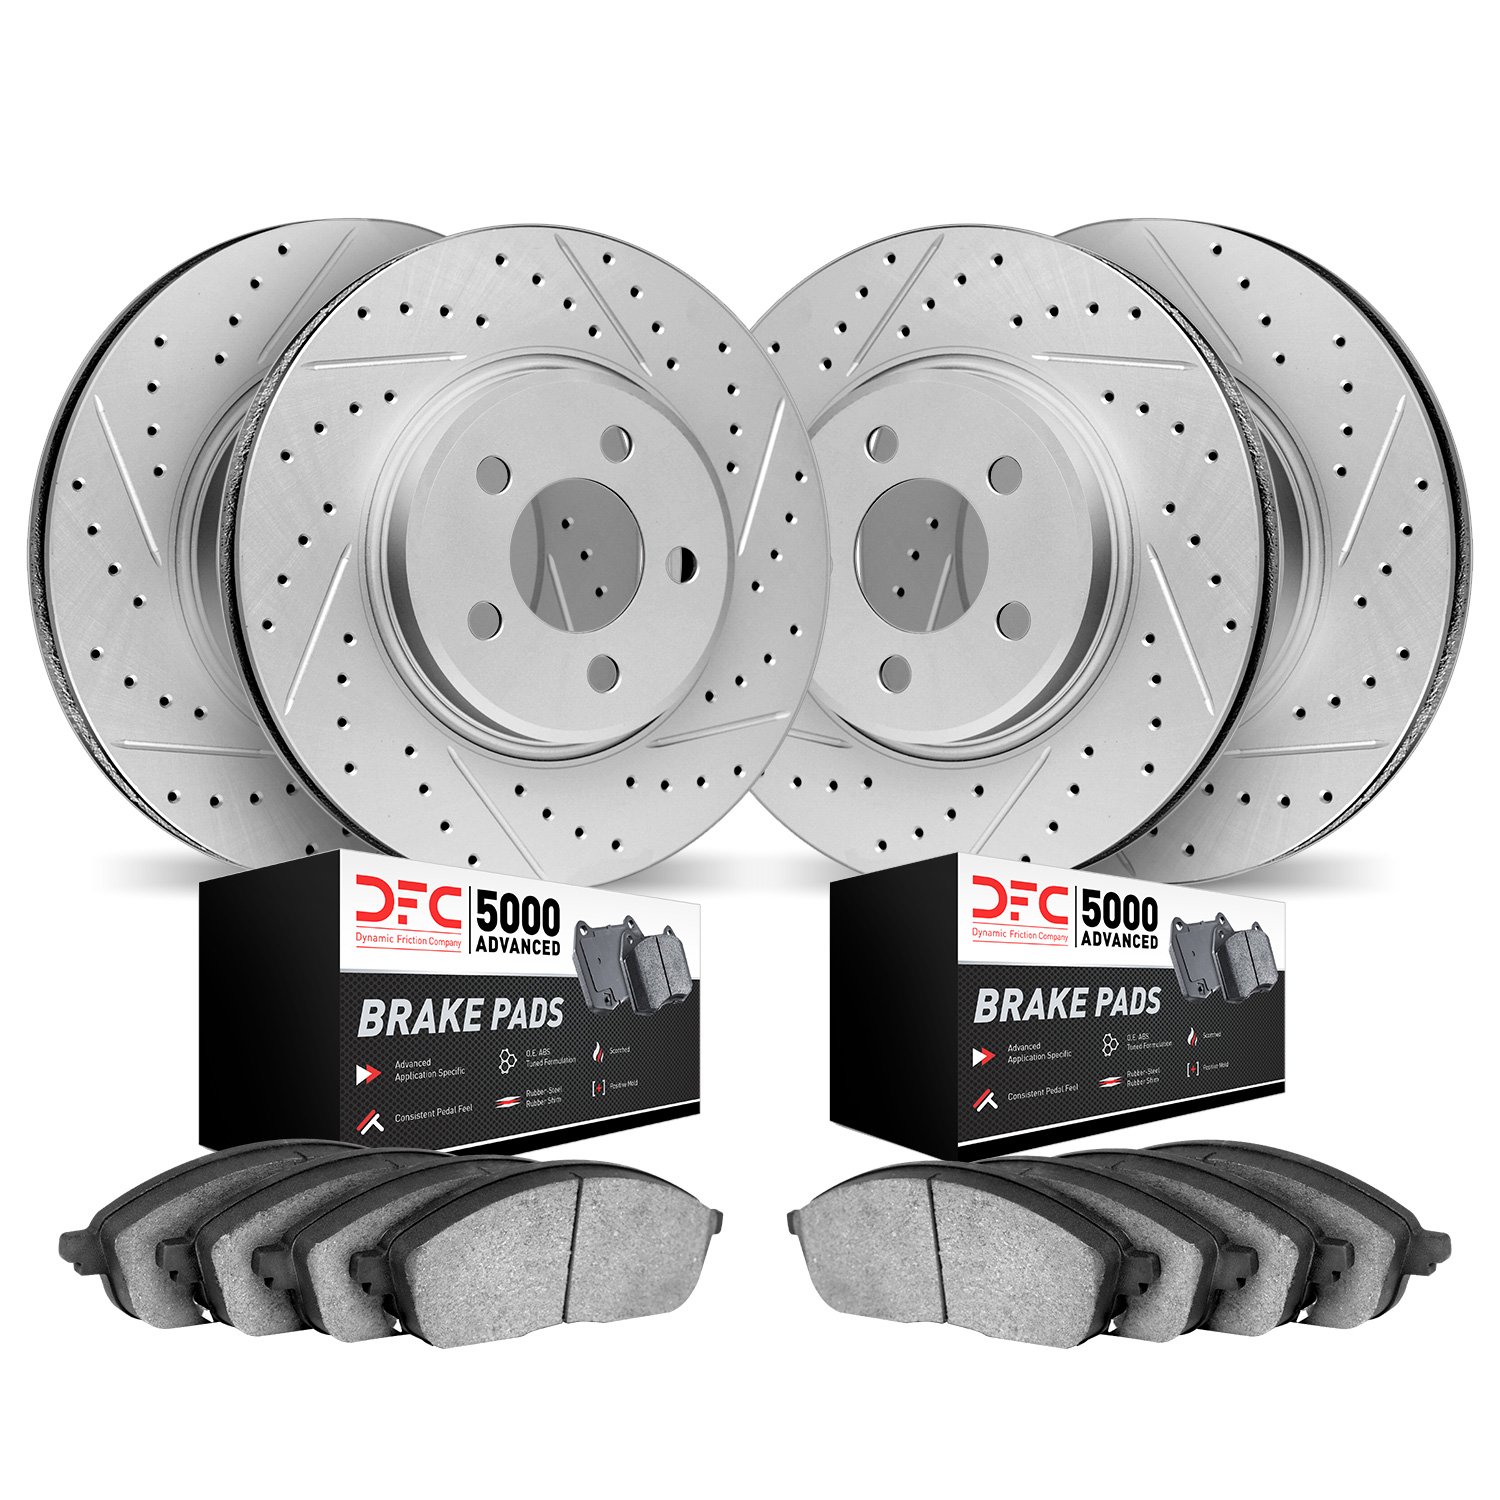 2504-27012 Geoperformance Drilled/Slotted Rotors w/5000 Advanced Brake Pads Kit, 2016-2020 Volvo, Position: Front and Rear